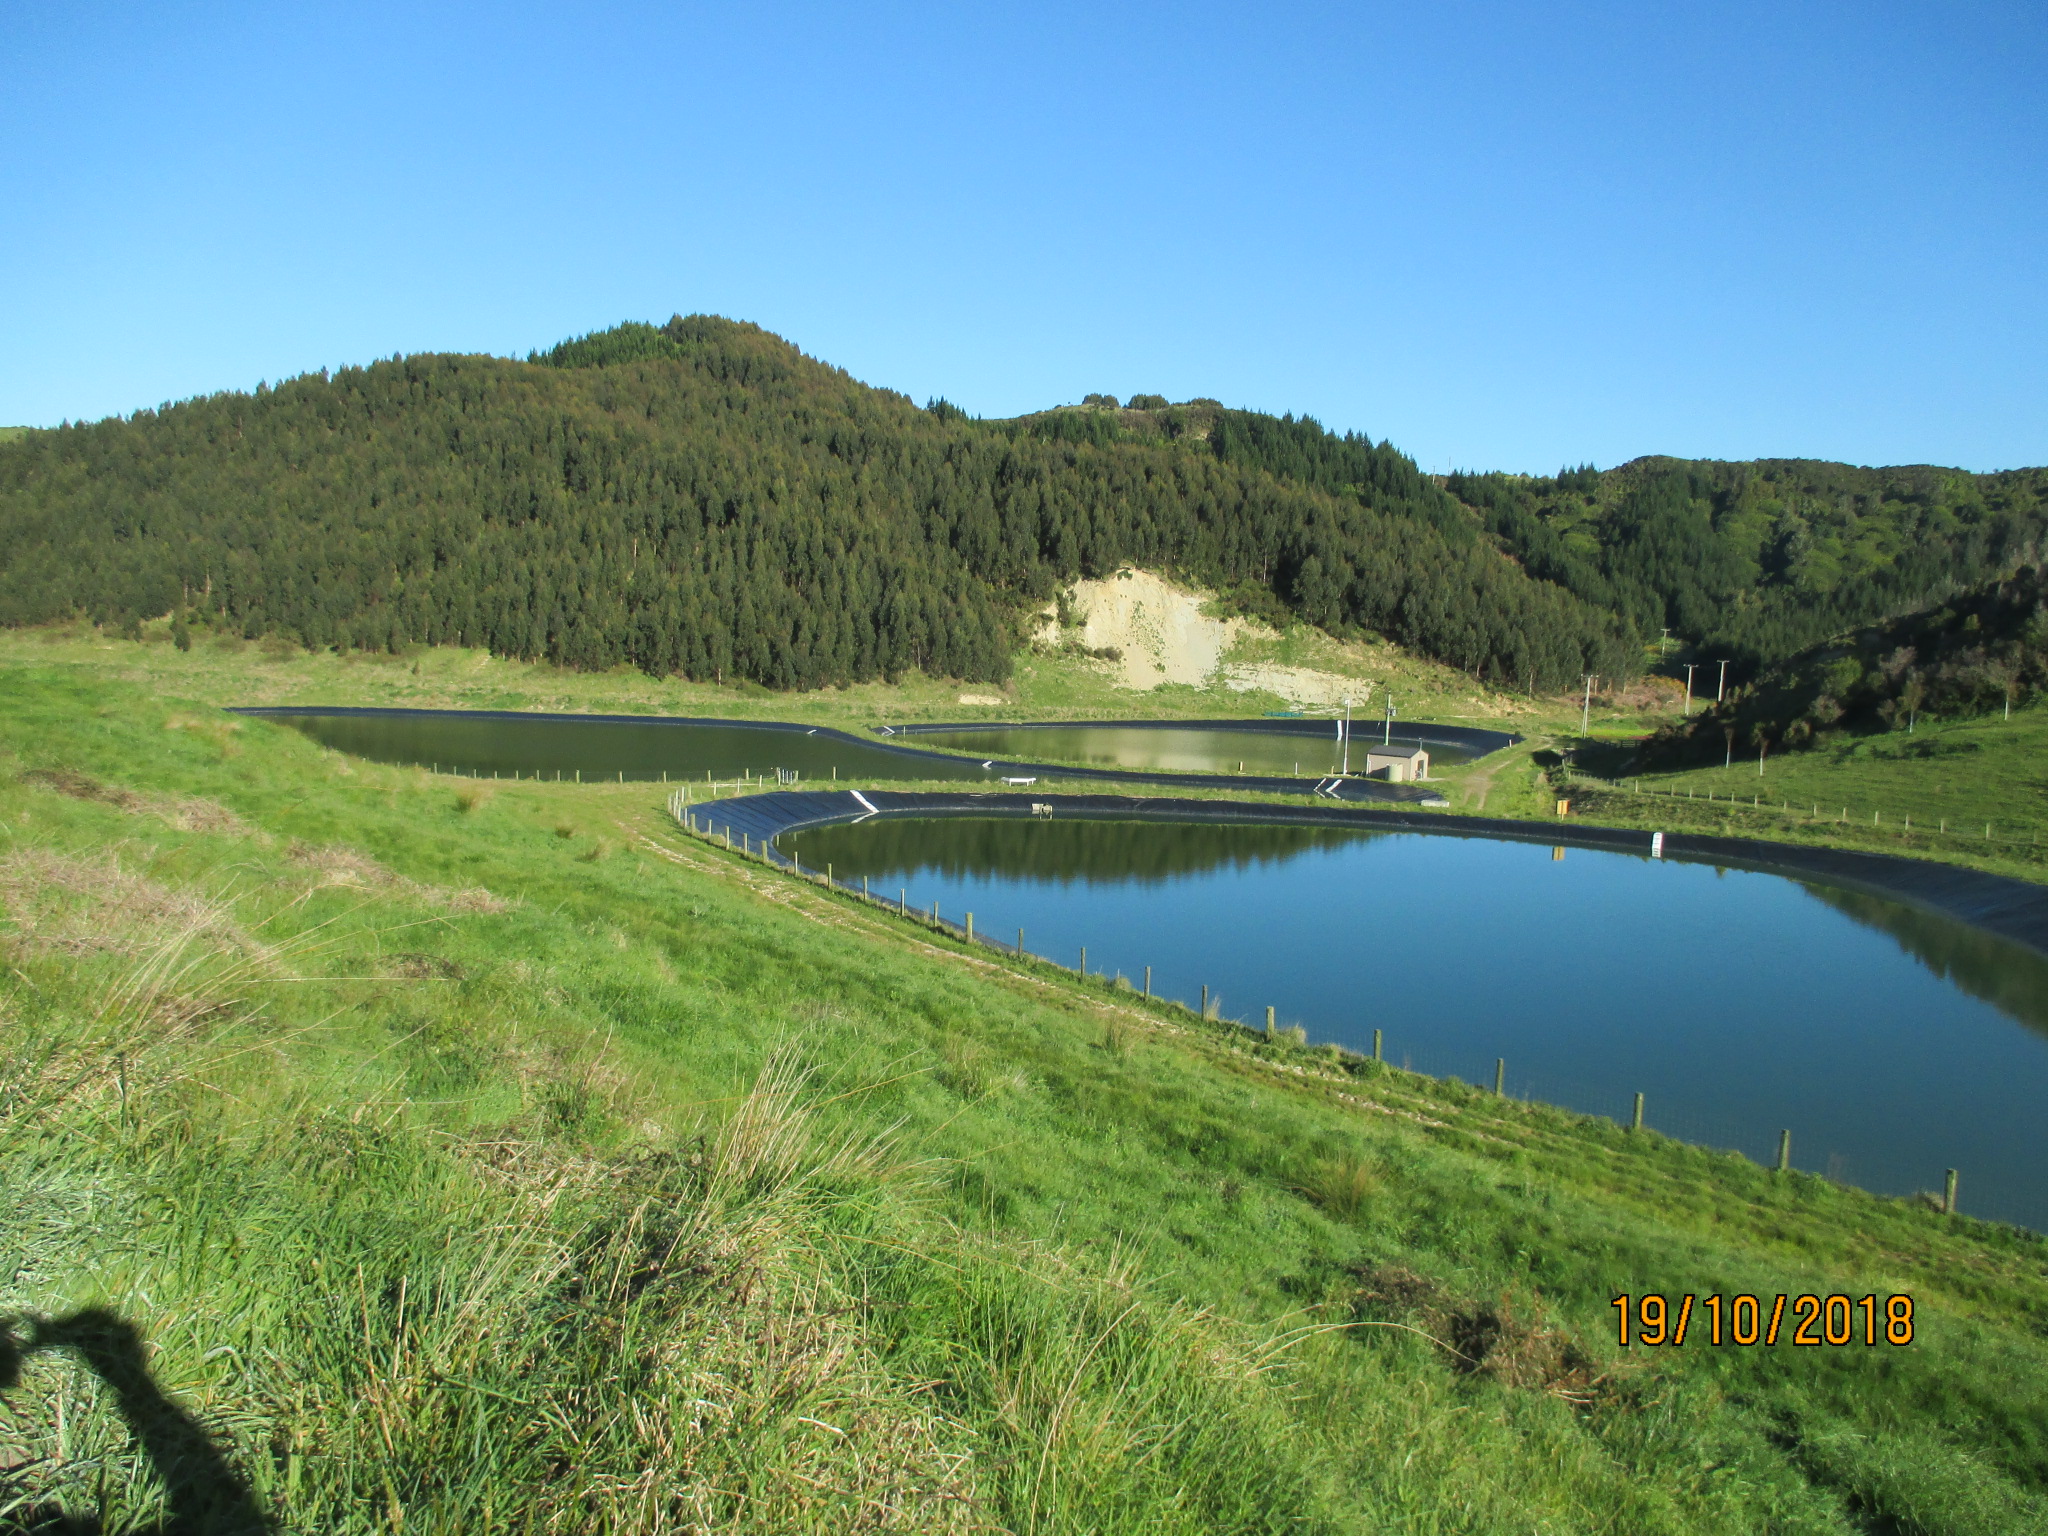 ponds surrounded by grass and a hill with trees